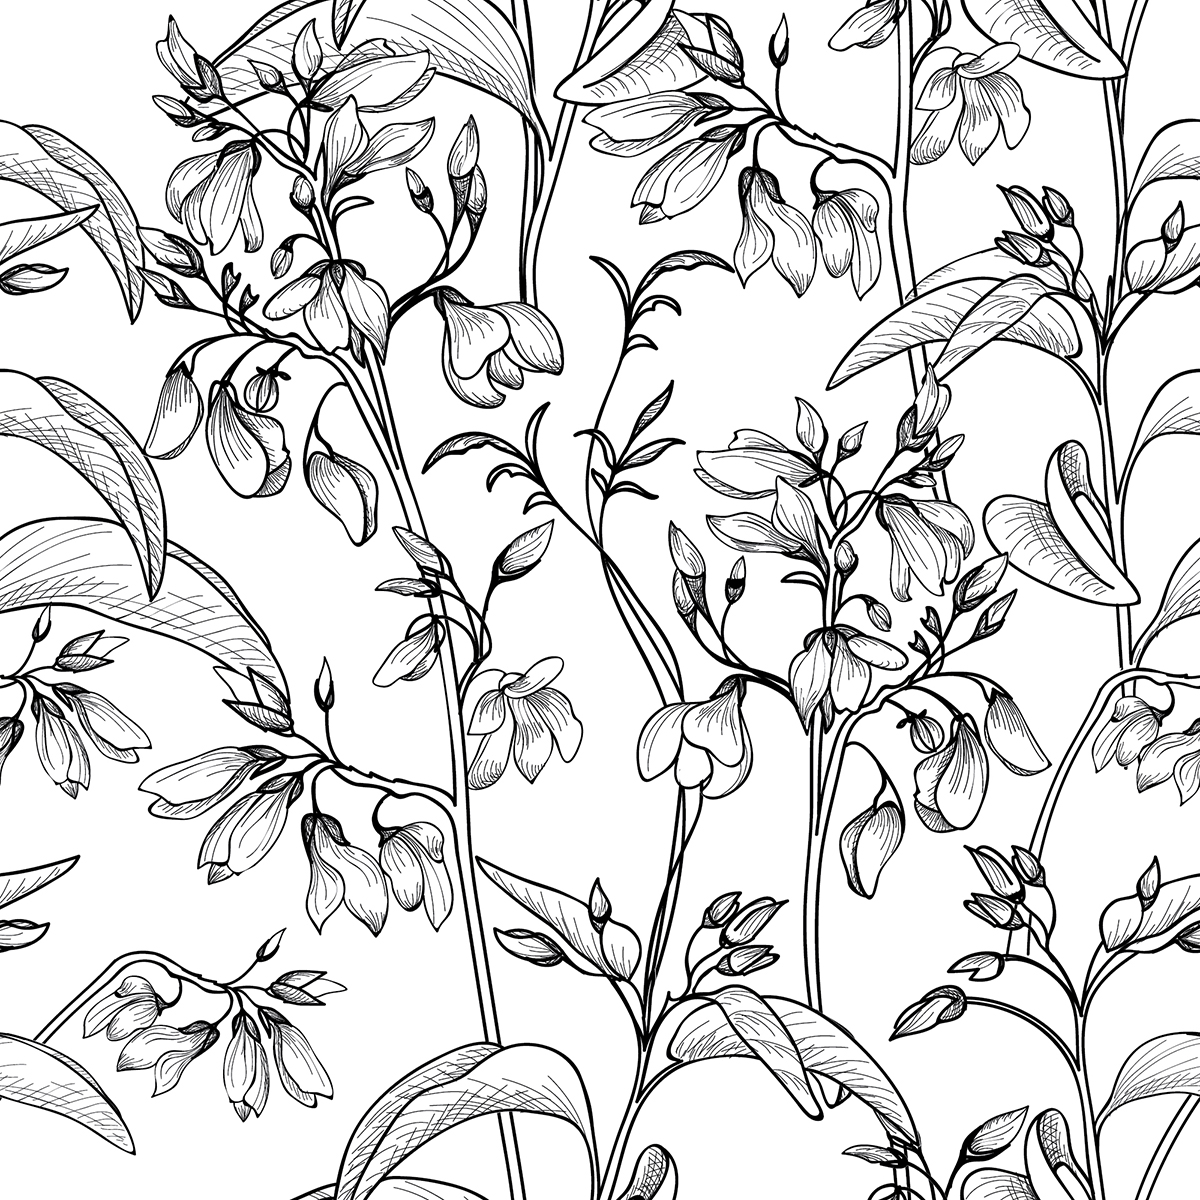 A black and white drawing of flowers